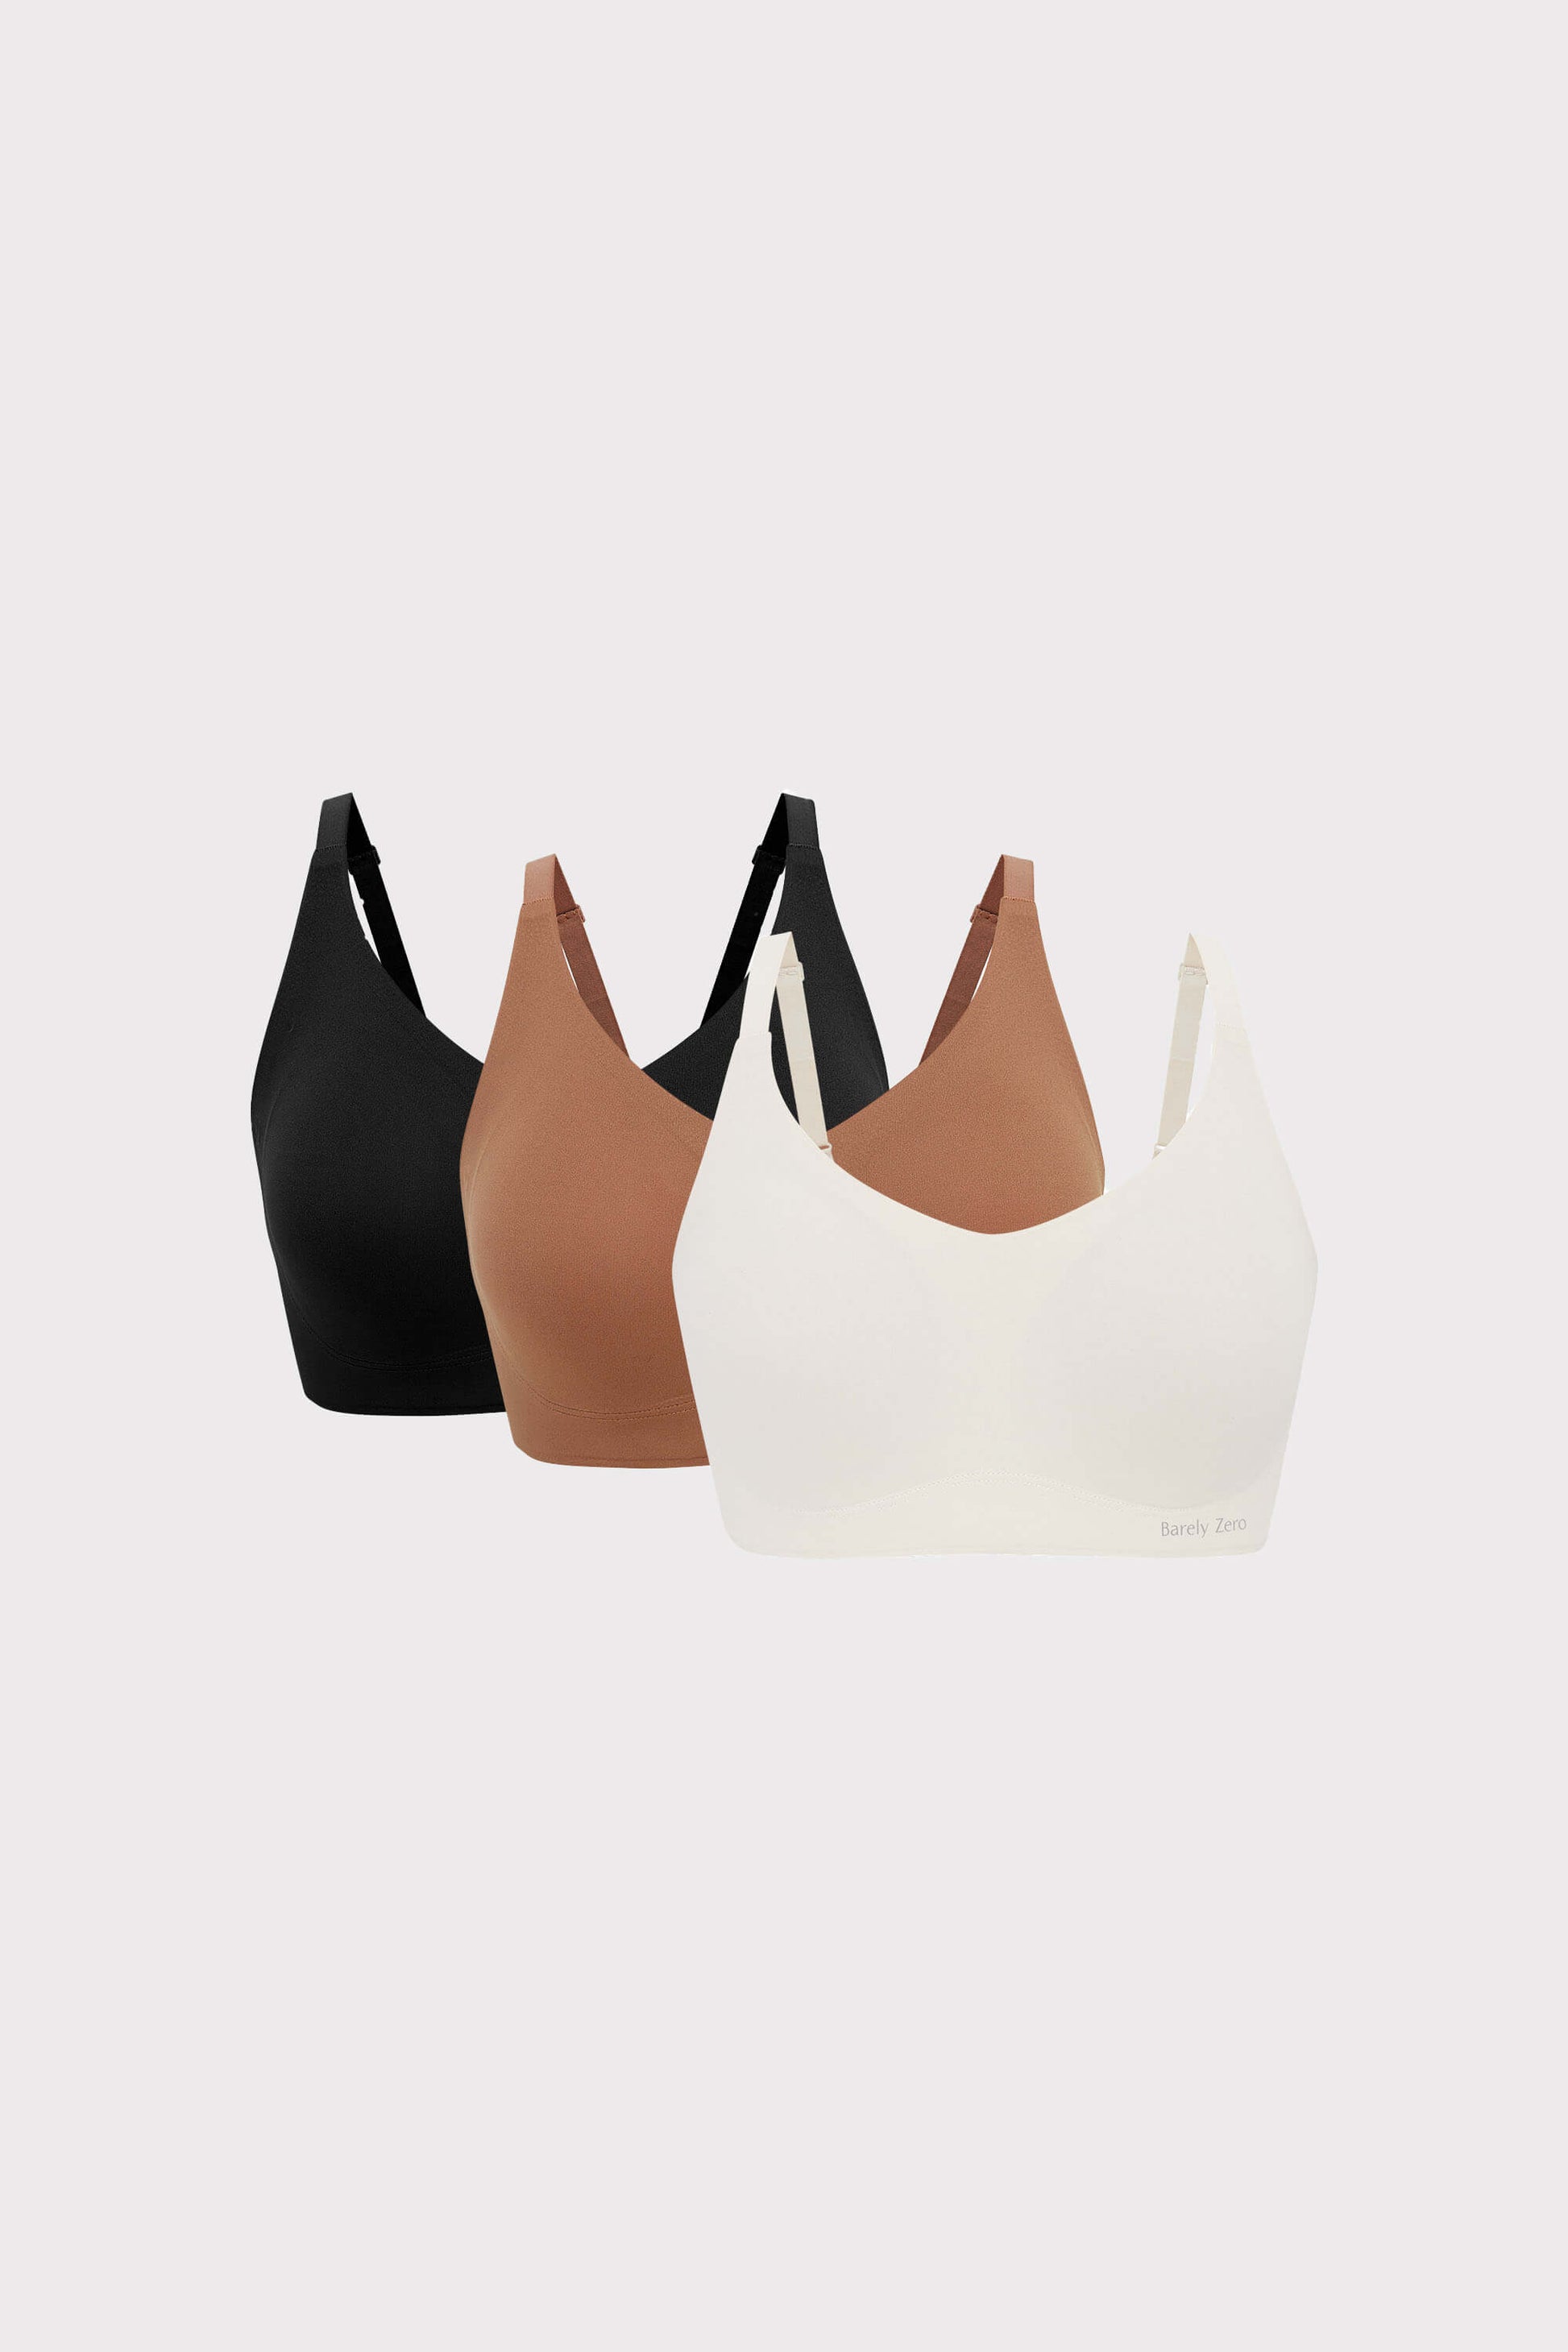 Invisibles Maternity Unlined Bralette by Calvin Klein Online